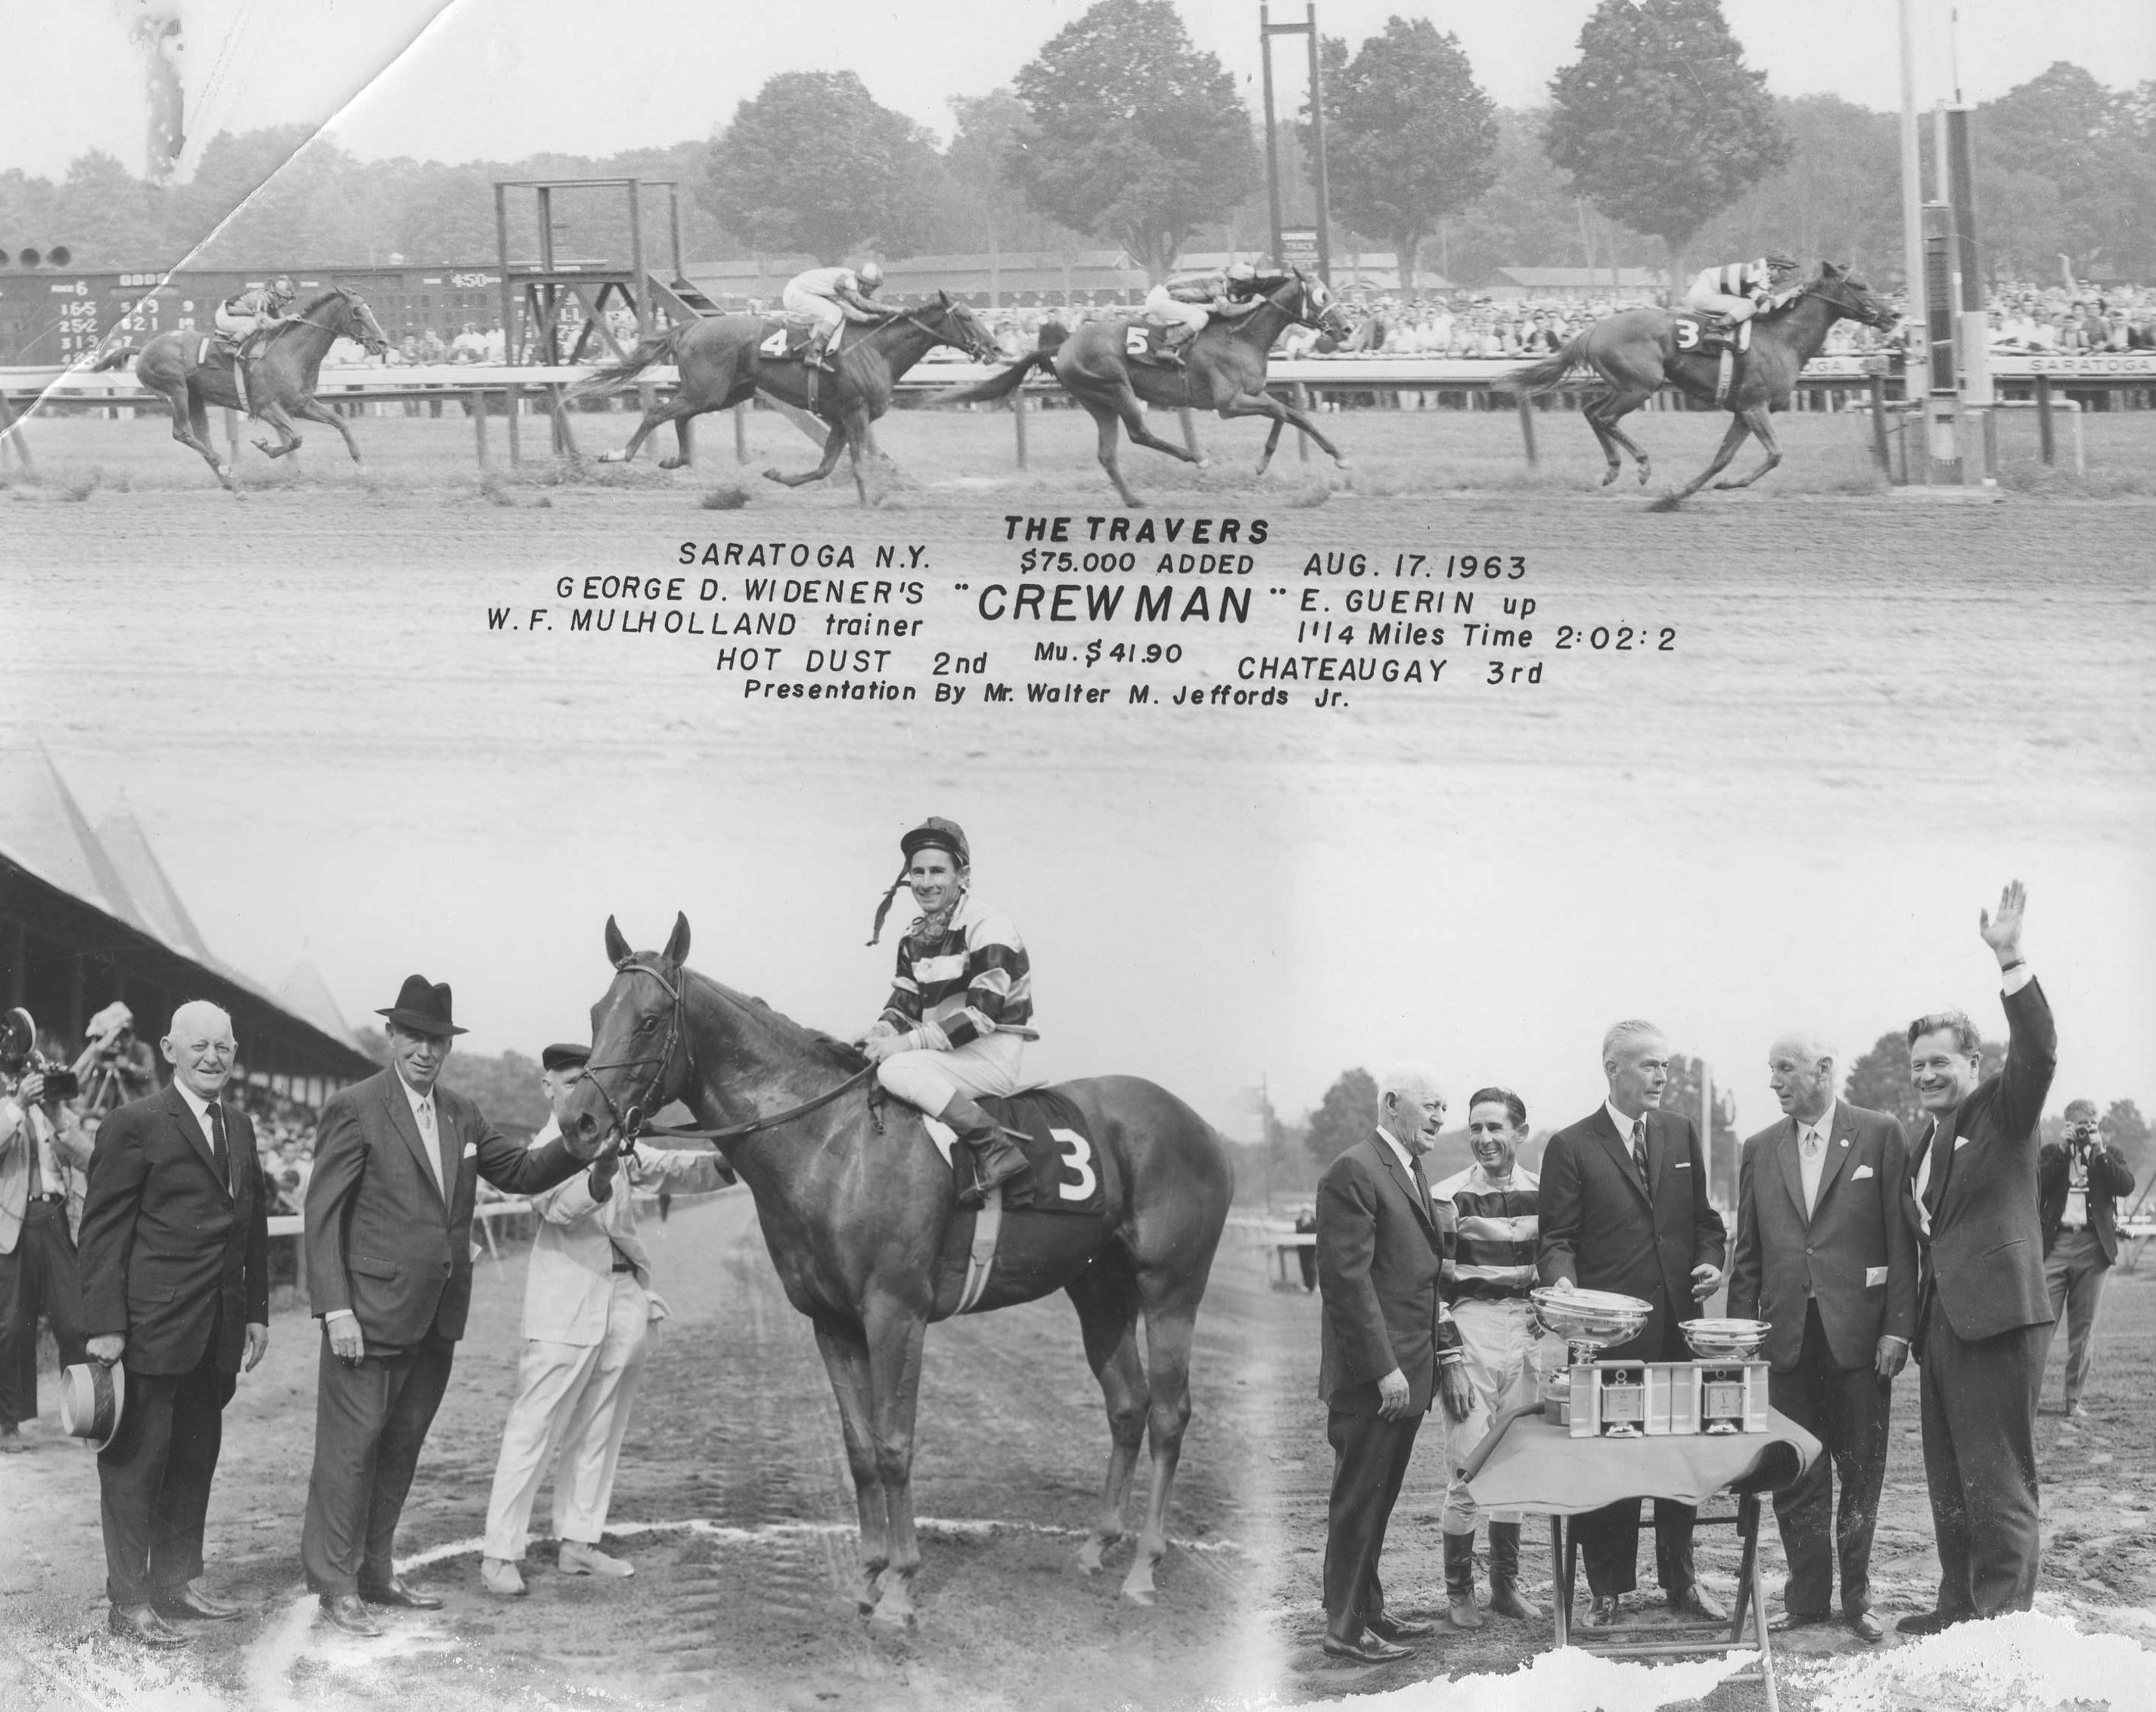 Win composite photograph for the 1963 Travers Stakes at Saratoga, won by Crewman with Eric Guerin up (NYRA/Museum Collection)